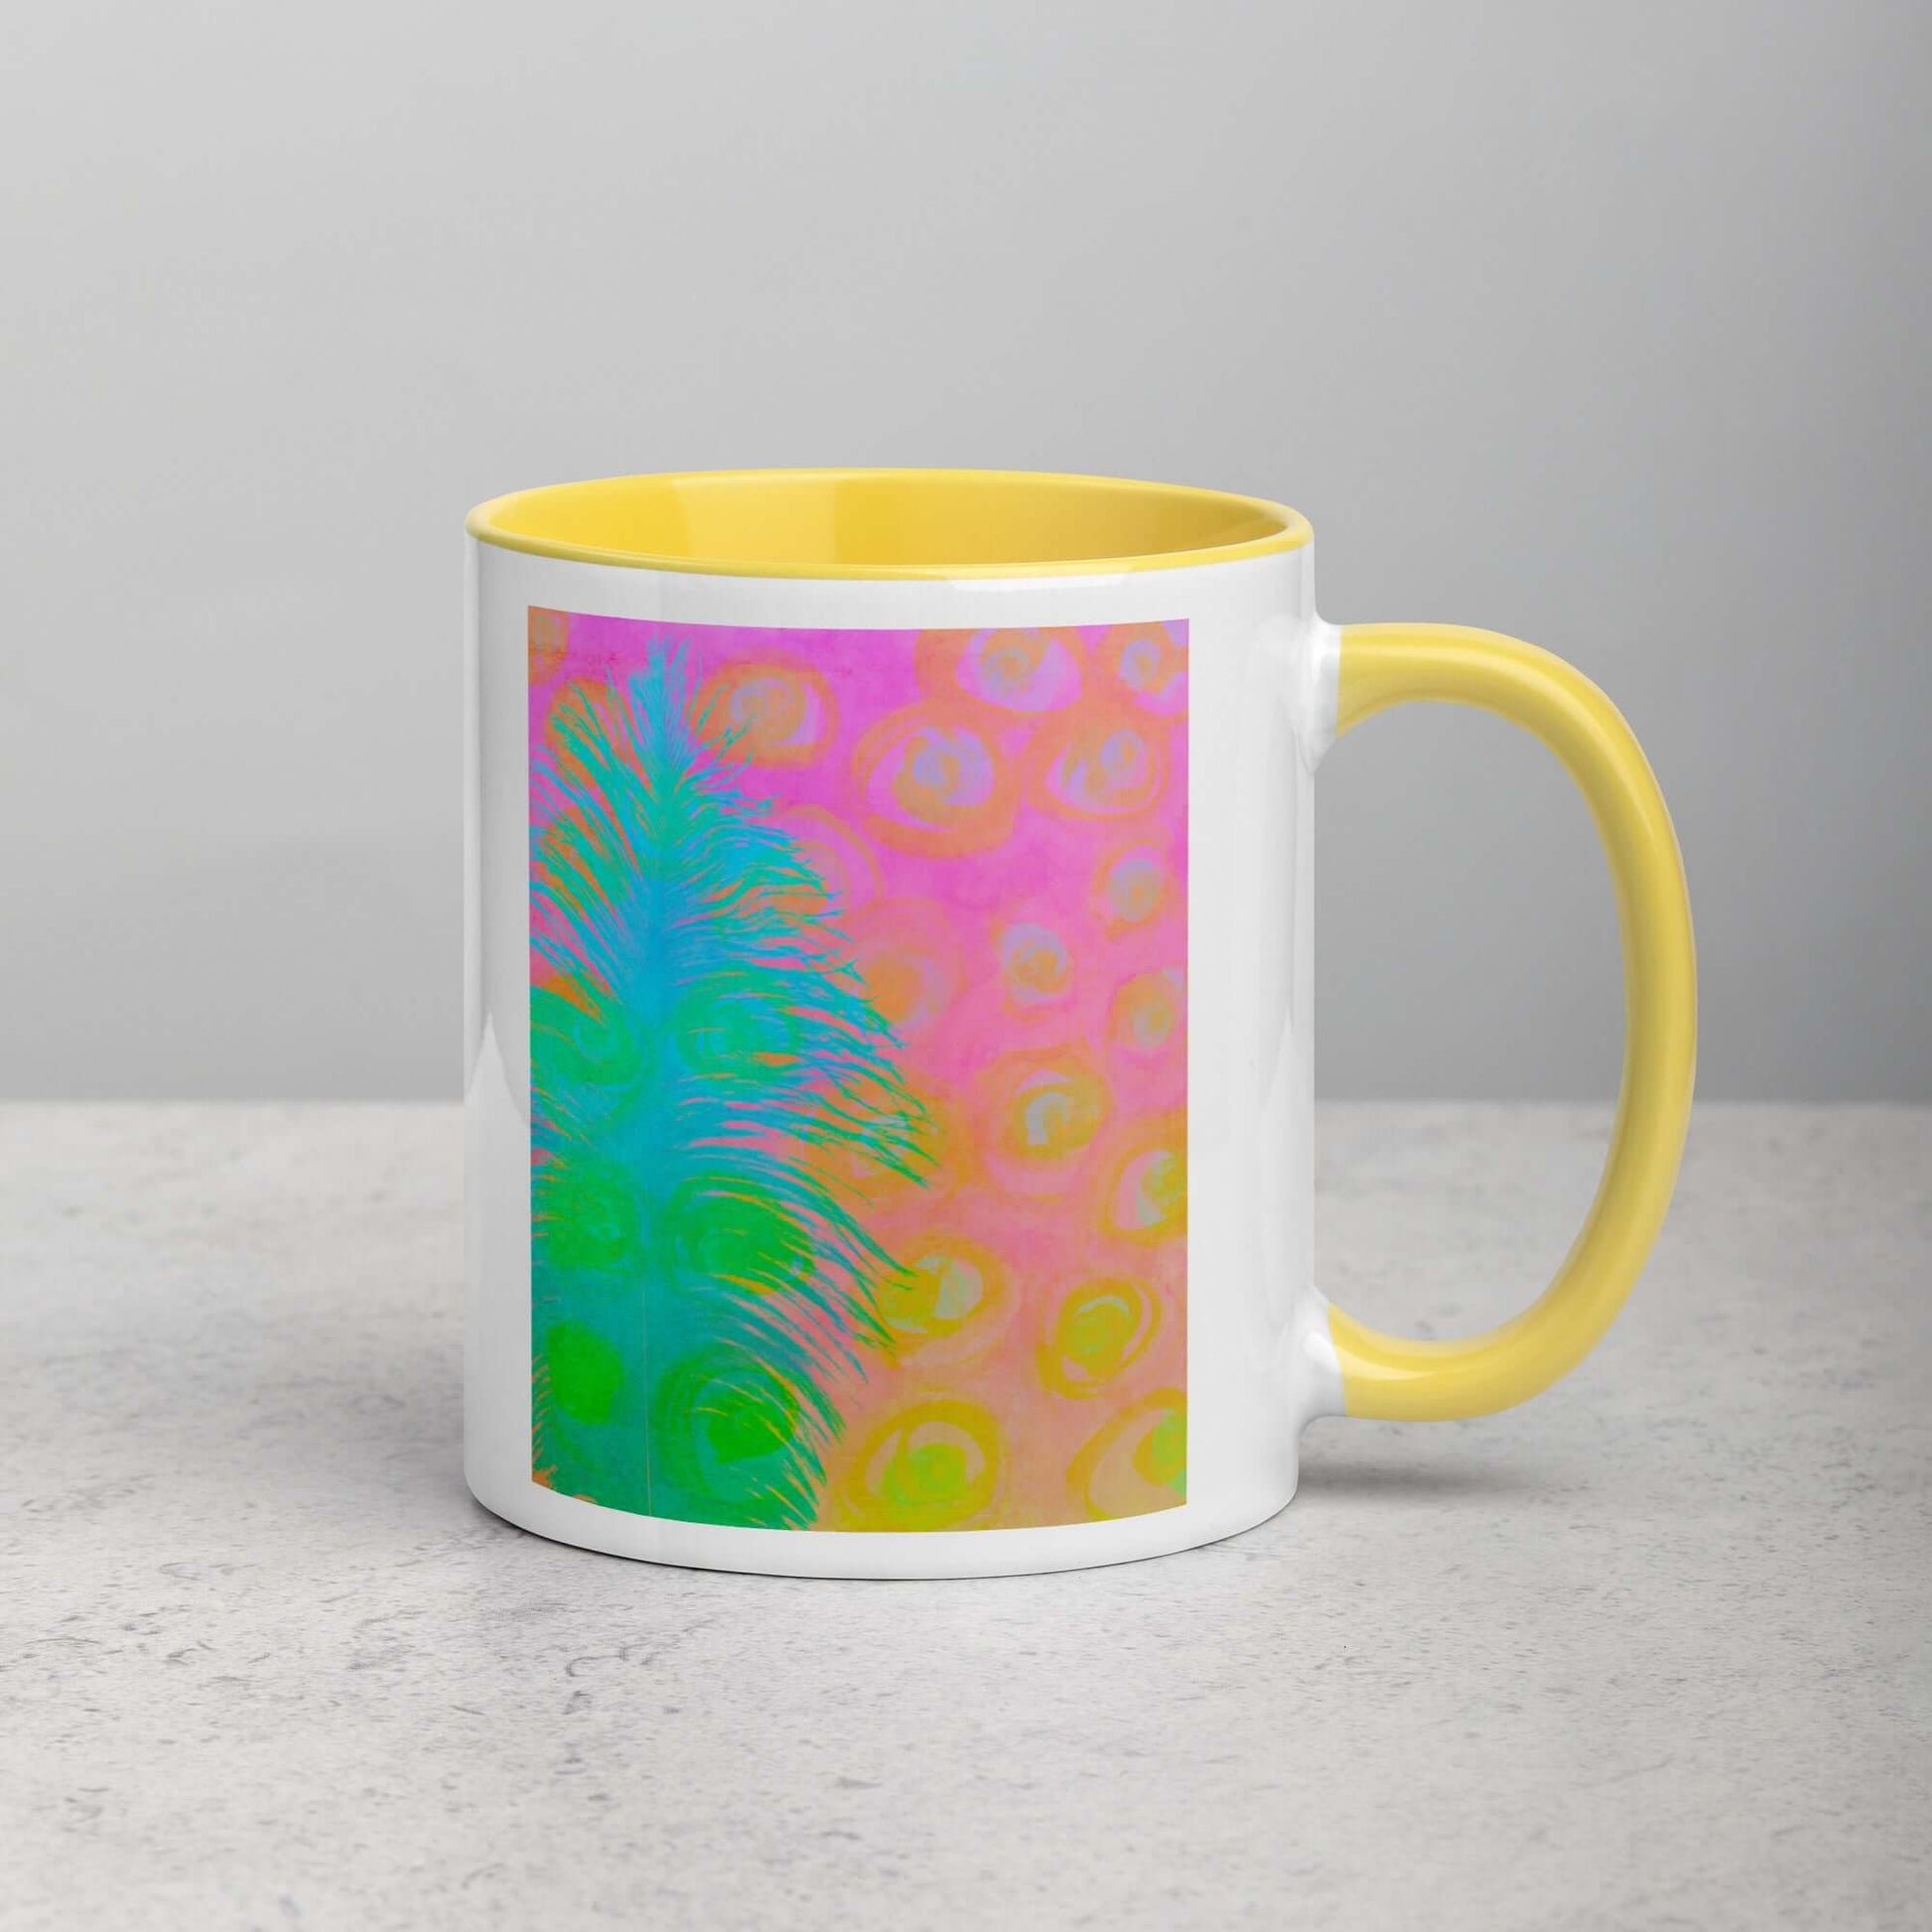 Bright Blue-Green Ostrich Feather on Pink and Yellow Background “My Other Half” Abstract Art Mug with Bright Yellow Color Inside Right Handed Front View